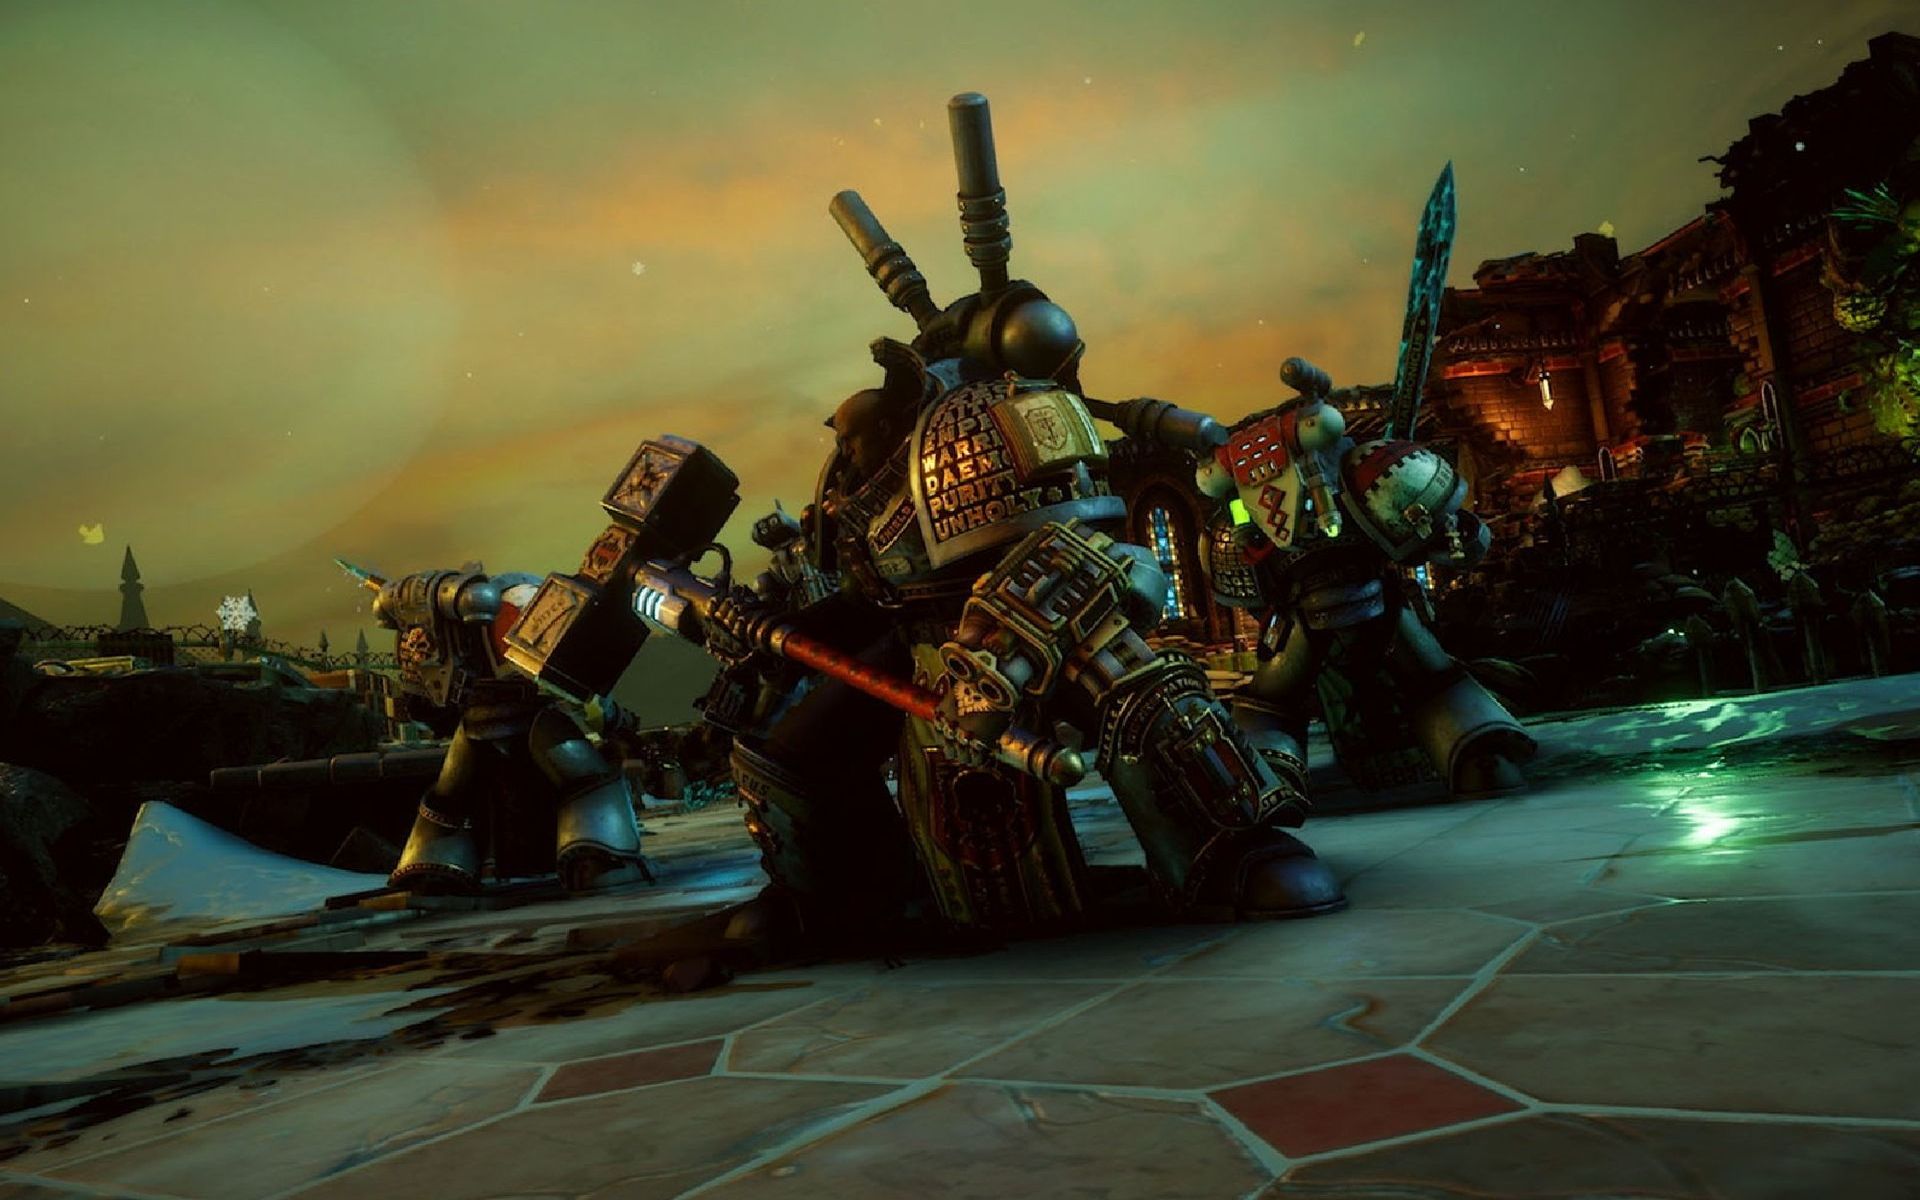 If you don't know how to unlock every class in Warhammer 40,000: Chaos Gate - Daemonhunters, we are here to help. Four classes are provided in Warhammer 40,000: Chaos Gate - Daemonhunters, the Justicar, Purgator, Interceptor, and Apothecary.